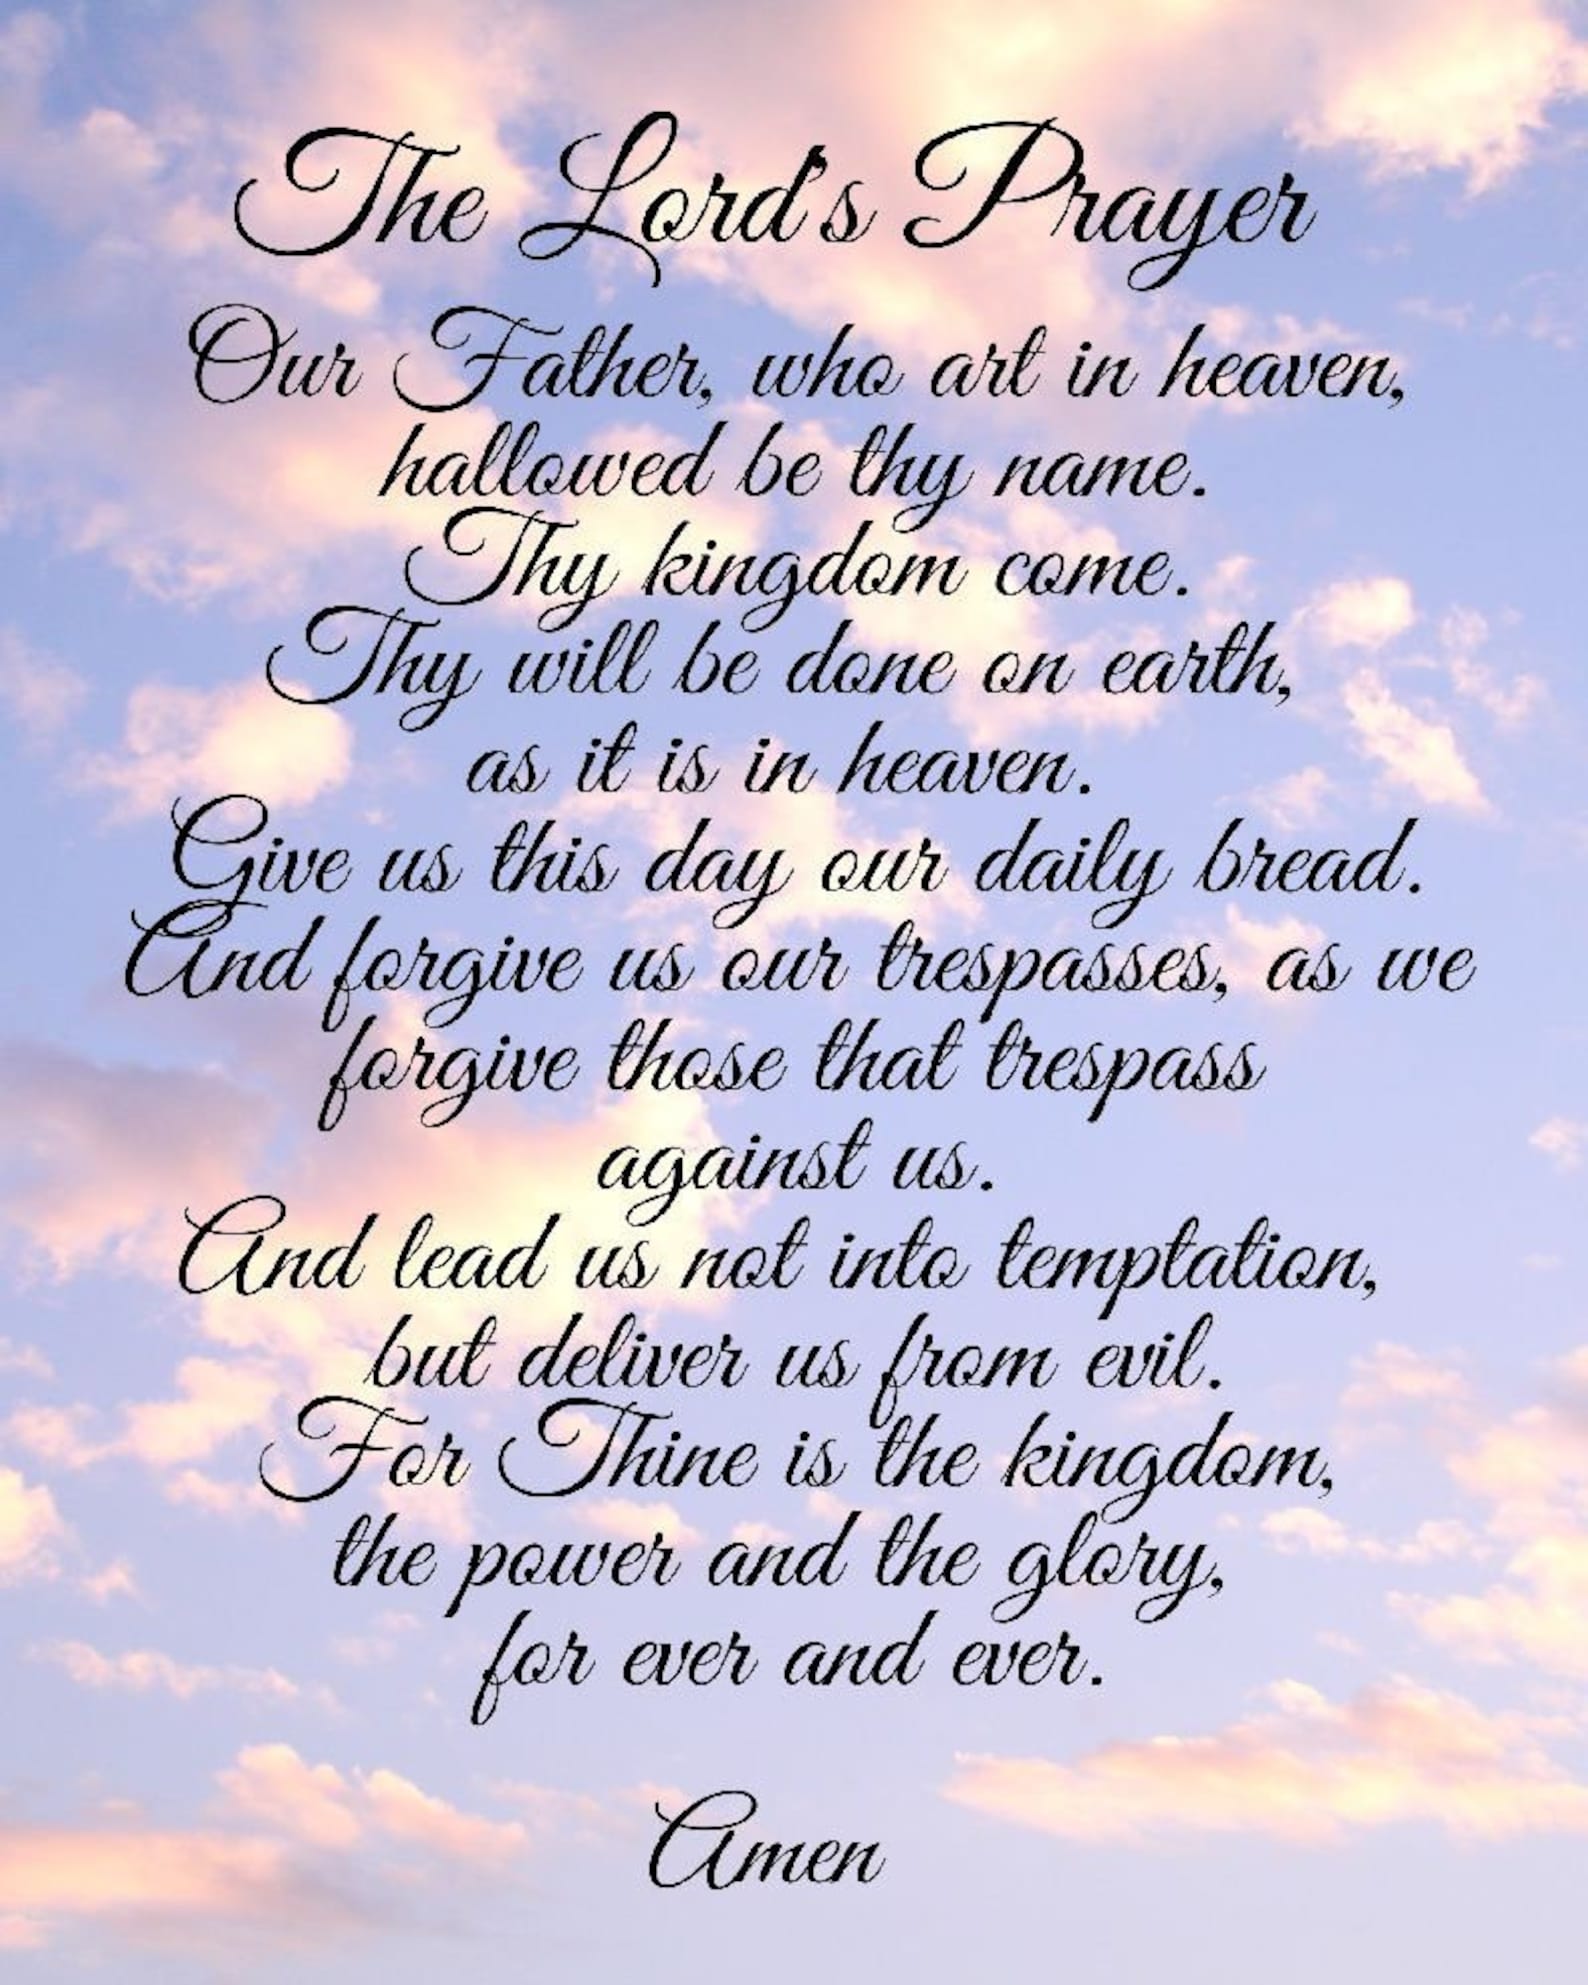 THE LORD'S PRAYER Unframed 8x10 Print Free Shipping - Etsy